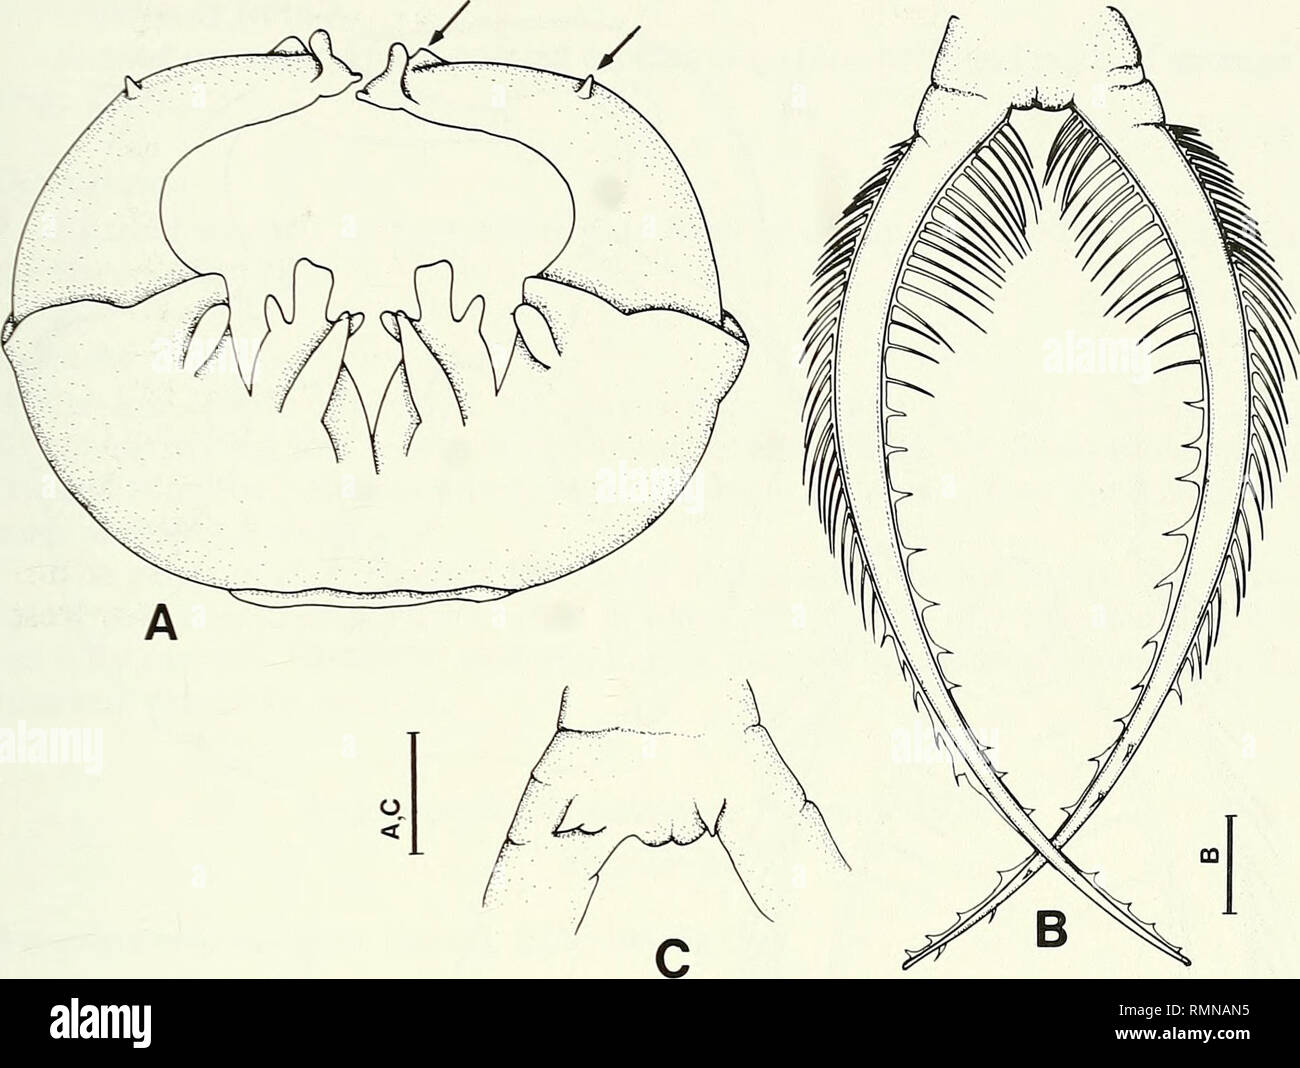 . Annals of the South African Museum = Annale van die Suid-Afrikaanse Museum. Natural history. THE GENUS BRANCHIPODOPSIS IN SOUTHERN AFRICA 341. Fig. 21. Branchipodopsis kaokoensis (BMNH 1932.2.25.42-45). A. Dorsal view of clypeus; arrows indicate projections on apical joint. B. Cercopods of male. C. Ventral view of last abdominal segment of male. Scales = 0.5 mm. Branchipodopsis karroensis Barnard, 1929 Fig. 22 Branchipodopsis karroensis Barnard, 1929: 198, fig. 5m-n. Material Syntypes. SAM-A5919, 2 6 (9.8 mm; 12.0 mm), 5 9 (9.5-12.3 mm); collected from Hoogeveld, south-west of Beaufort West, Stock Photo